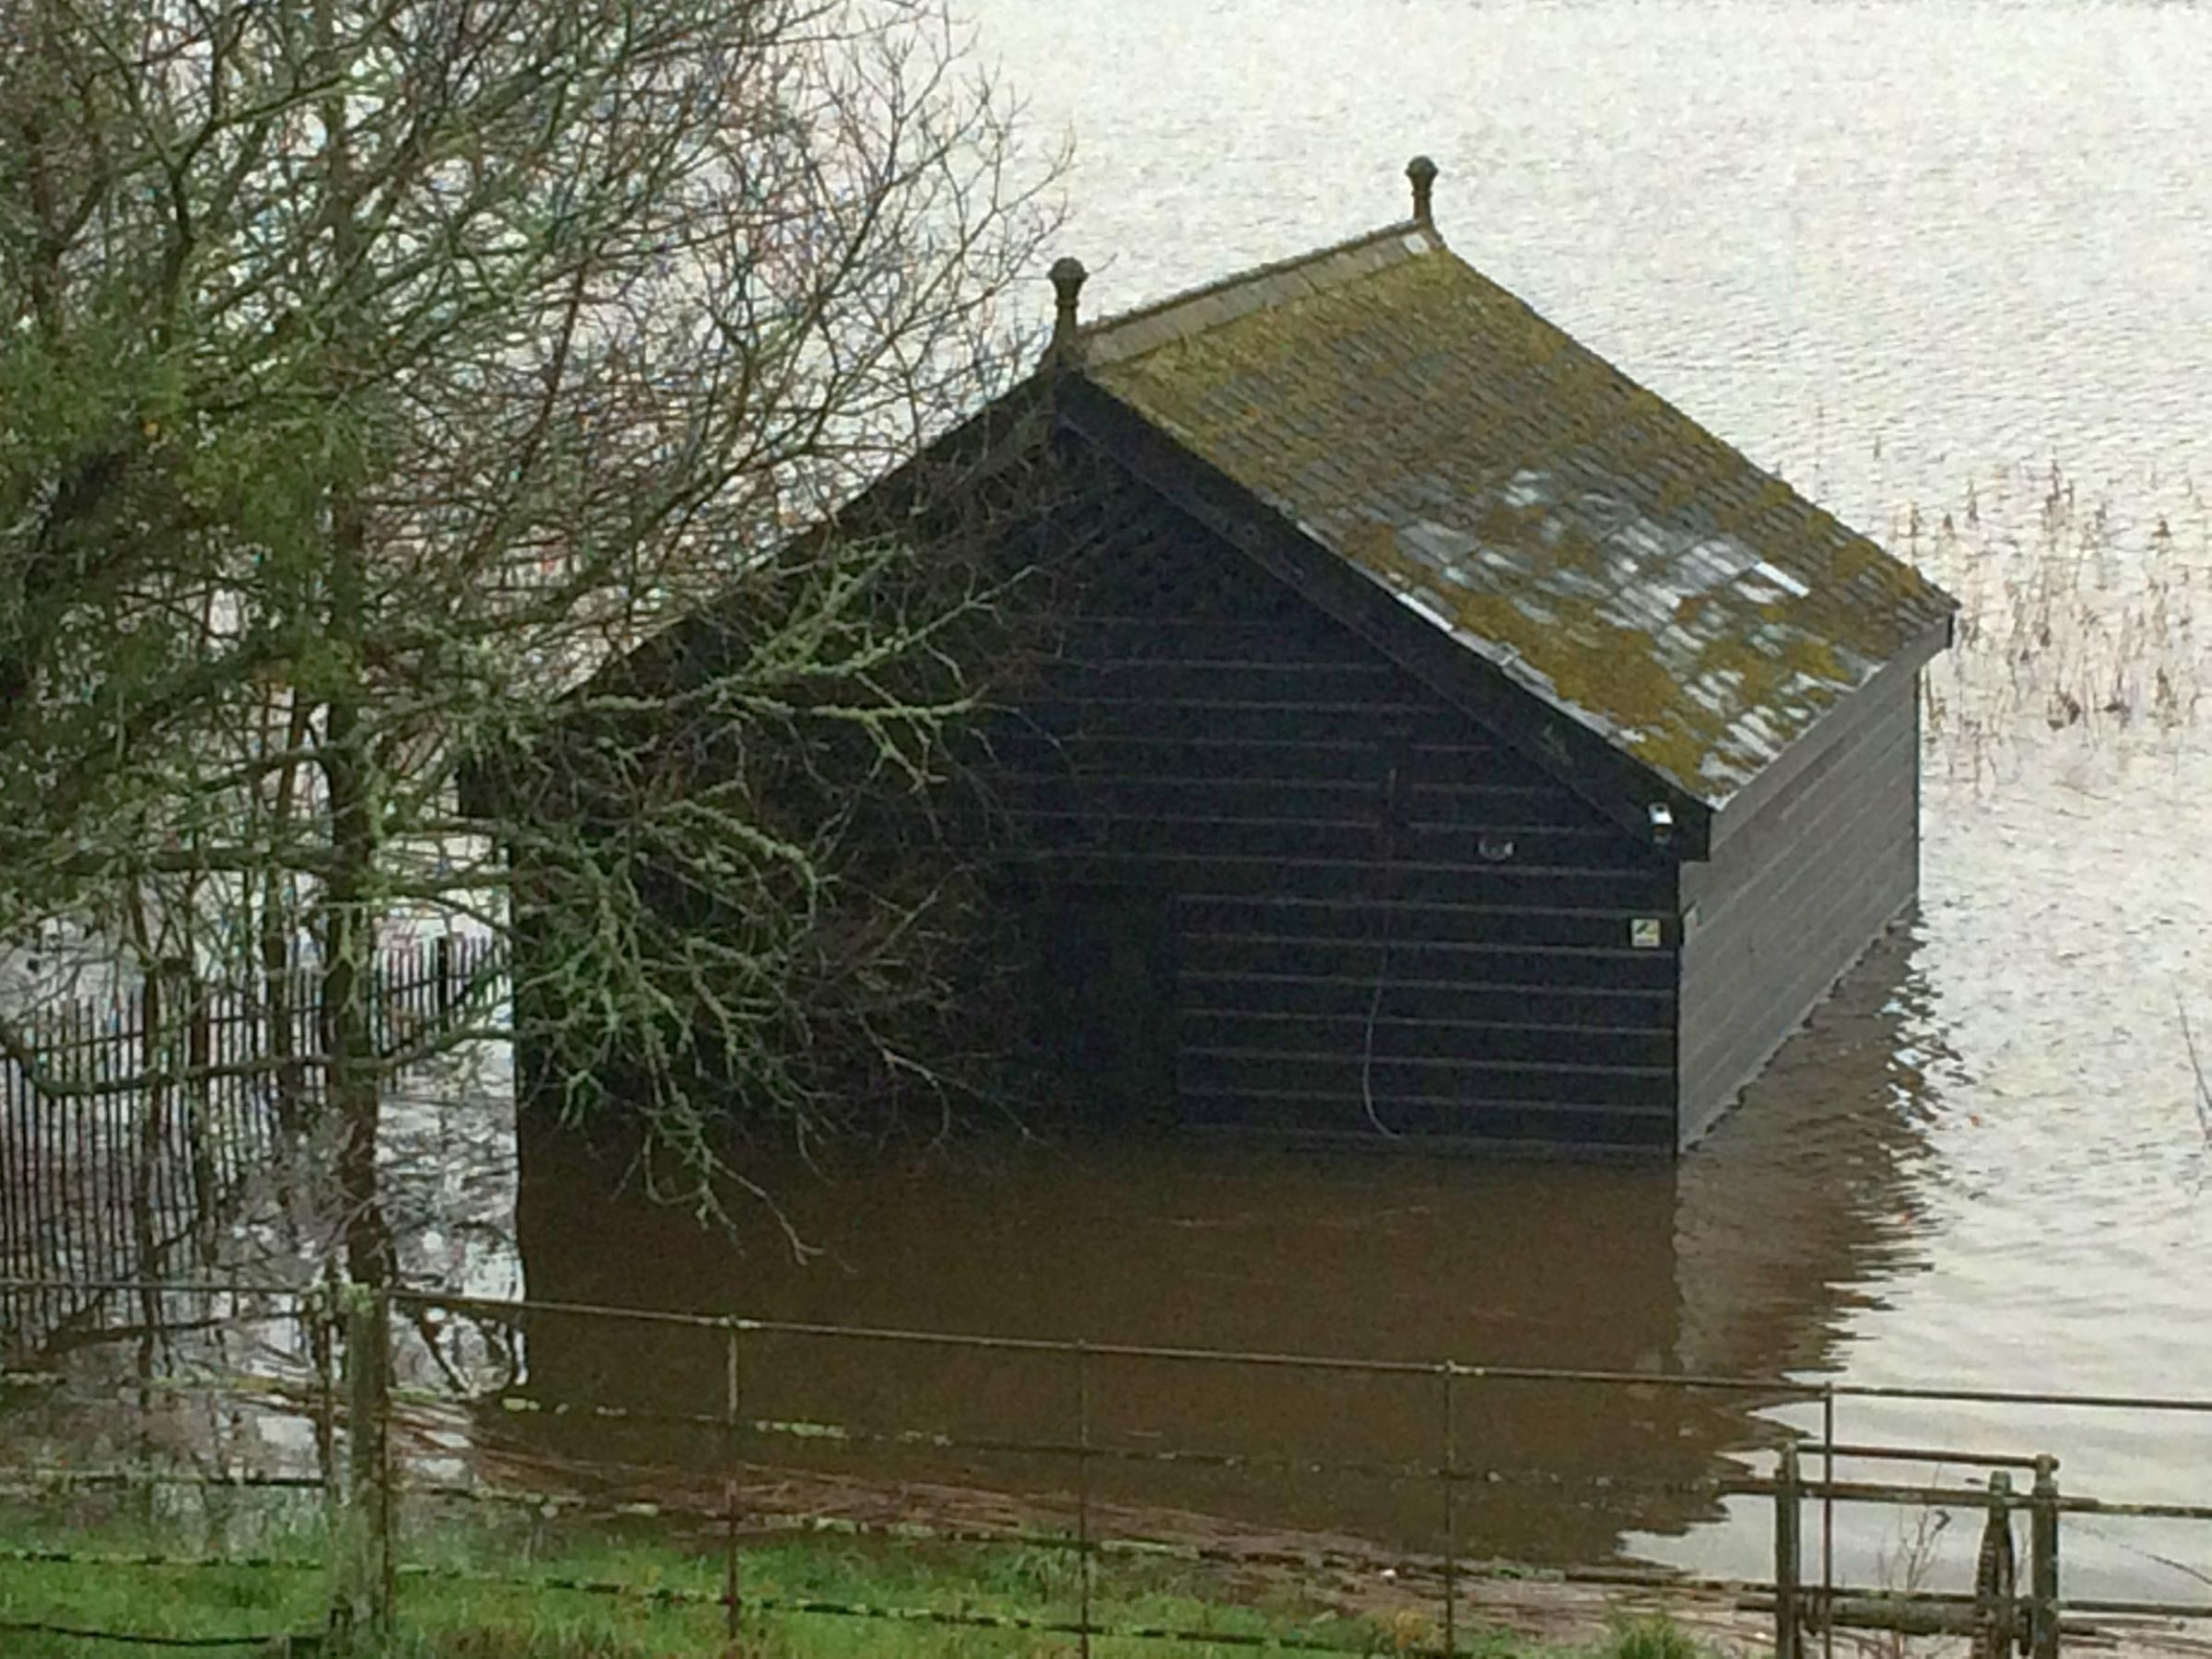 Water comes halfway up the boathouse by Loe Pool